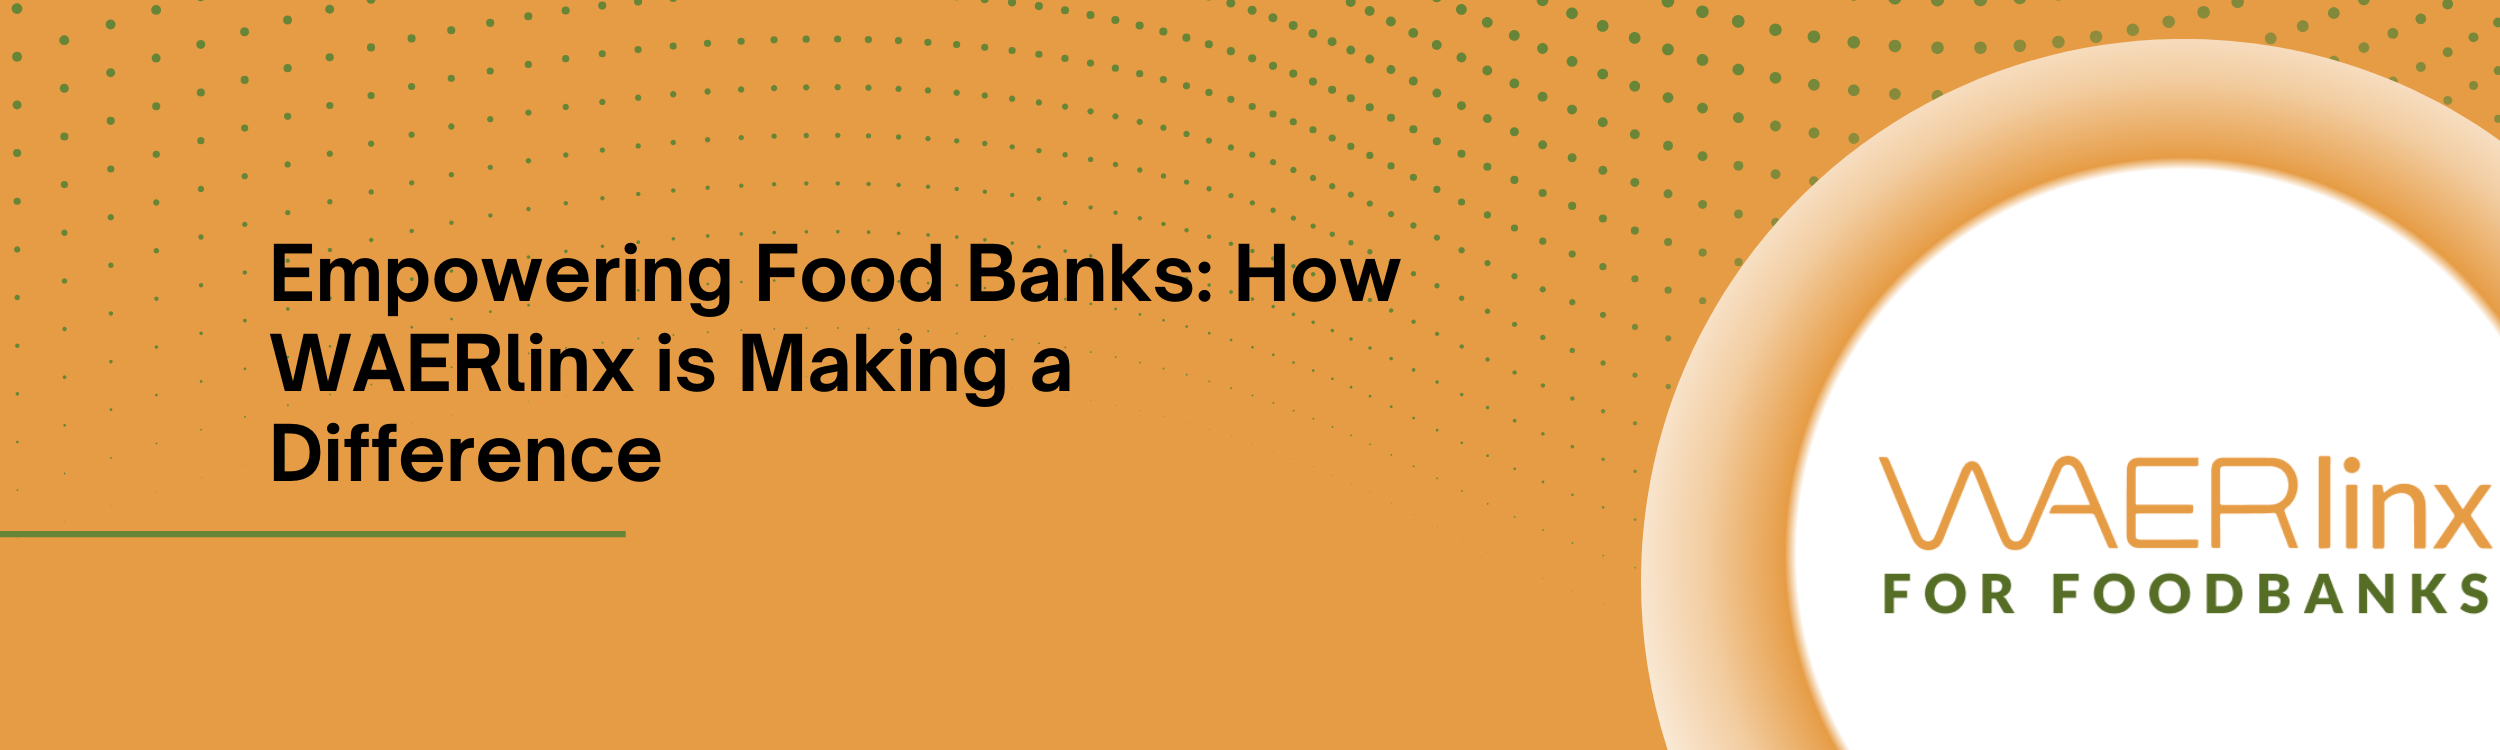 Empowering Food Banks: How WAERlinx is Making a Difference